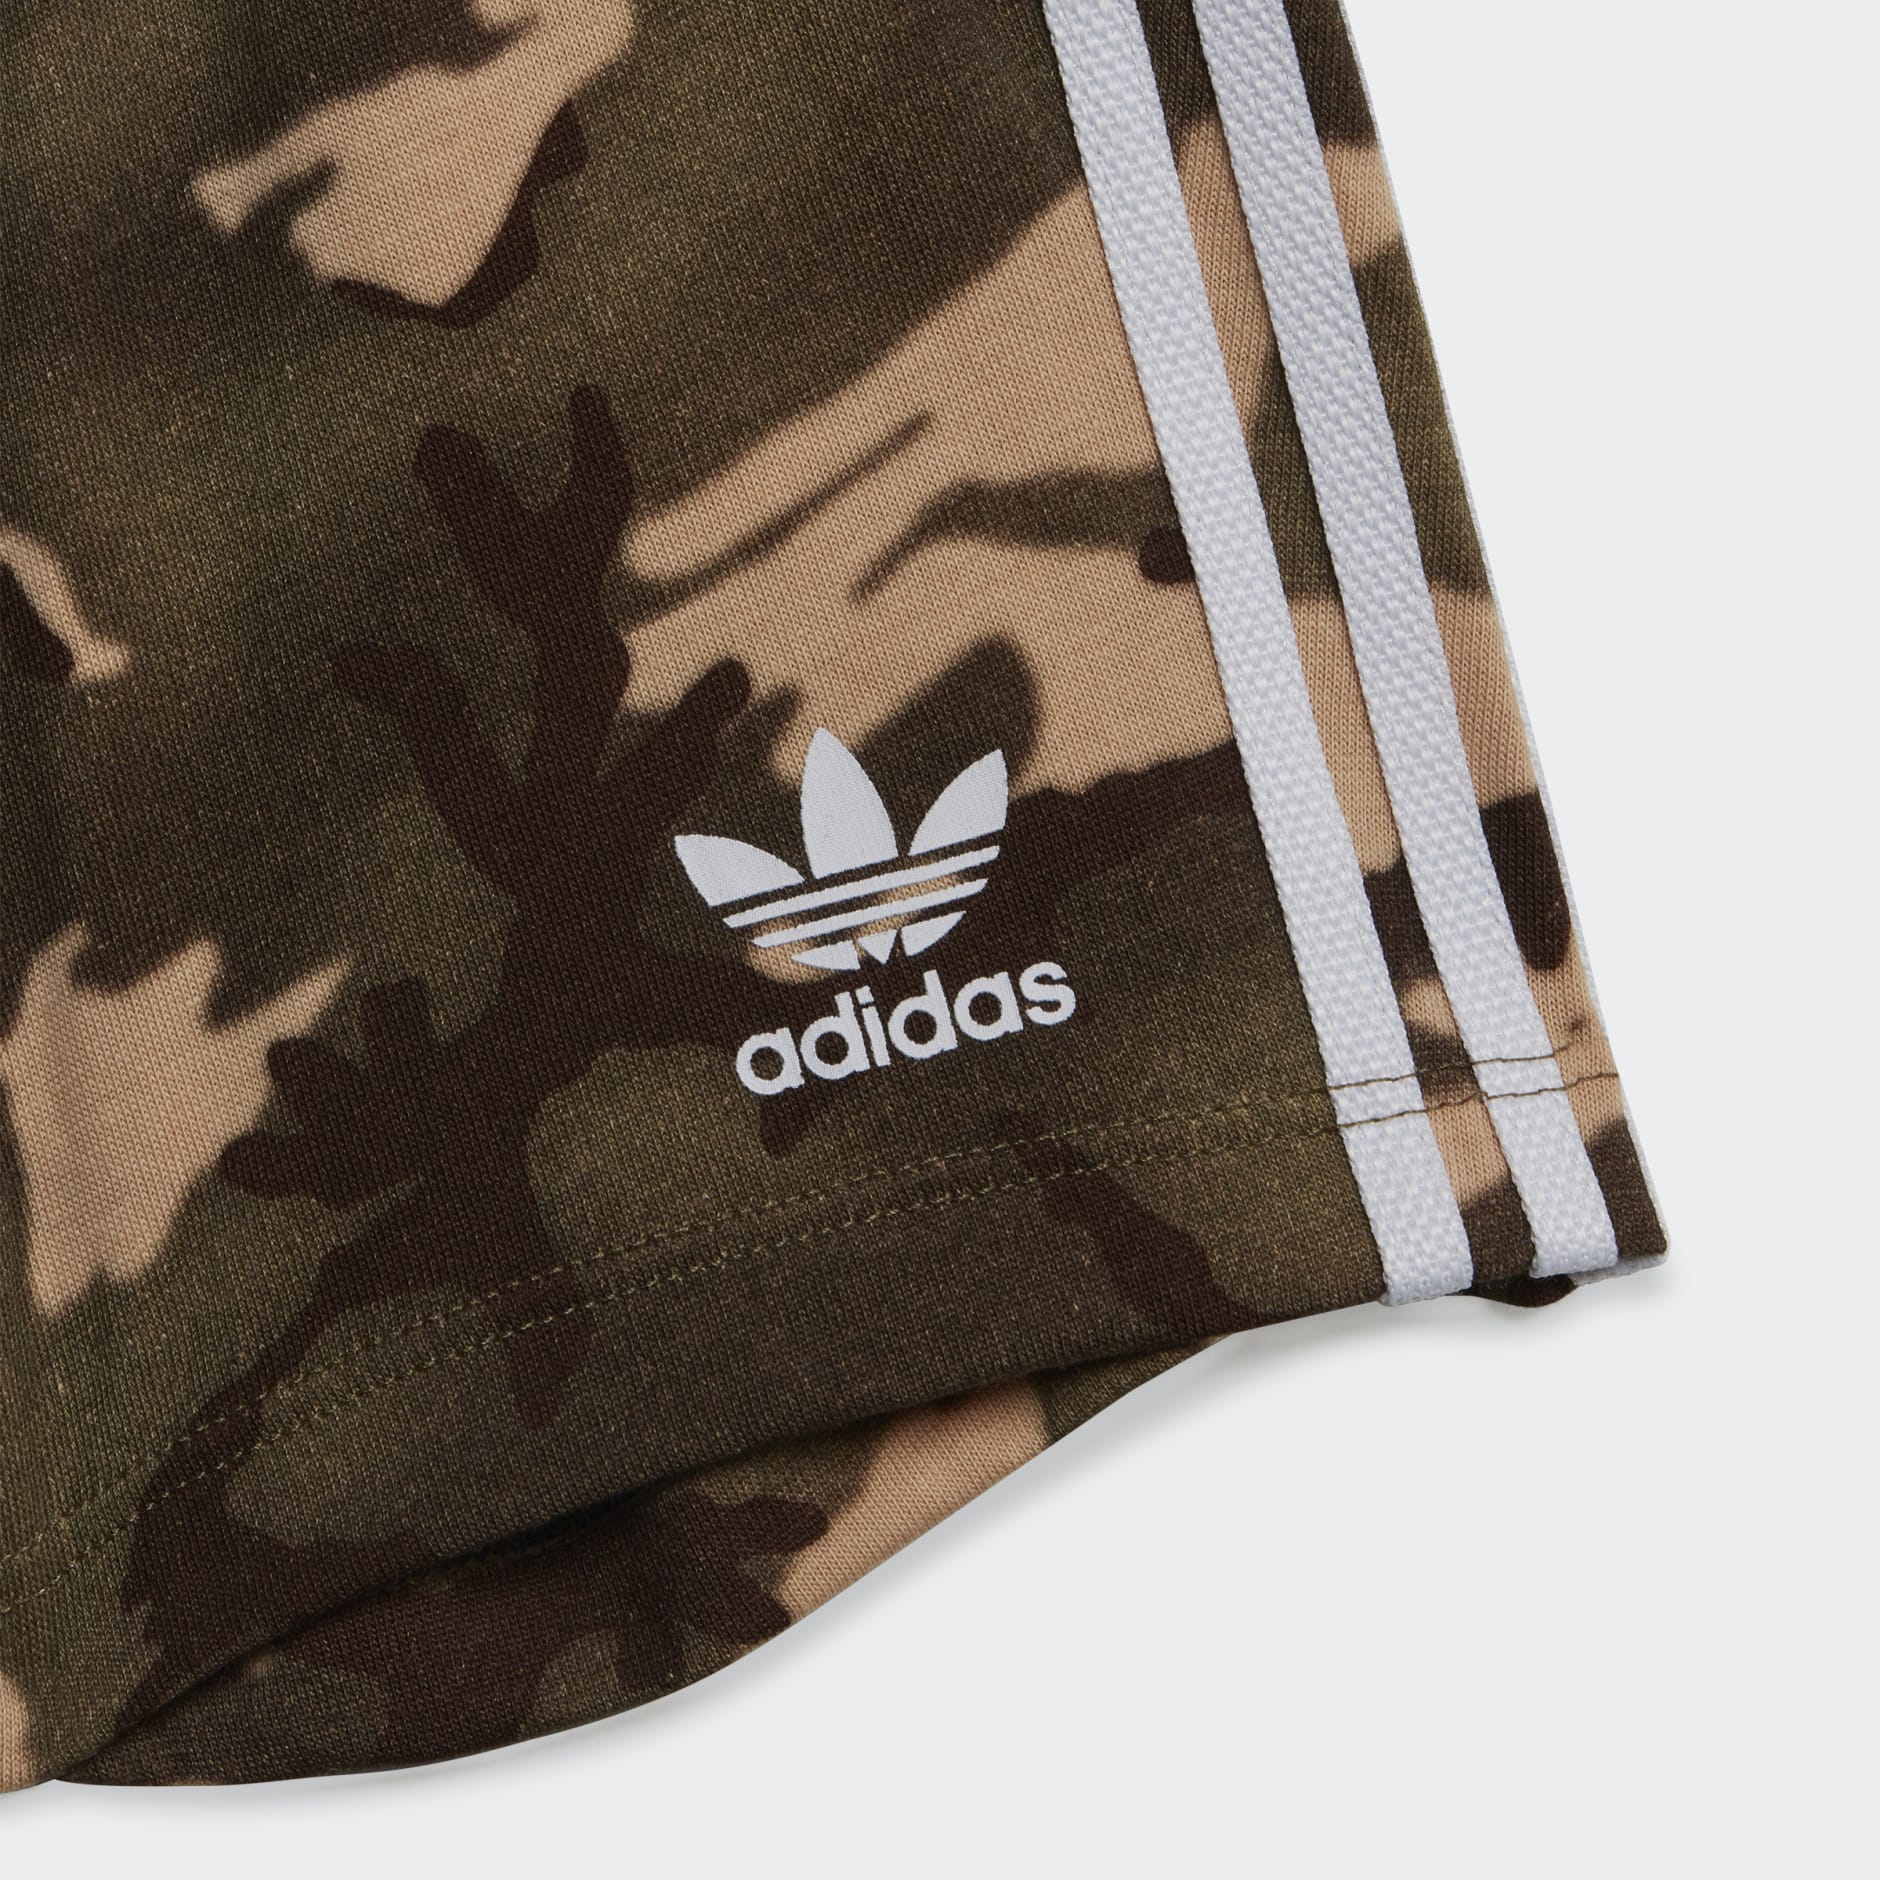 Clothing - Camo Tee and Shorts Set - White | adidas South Africa